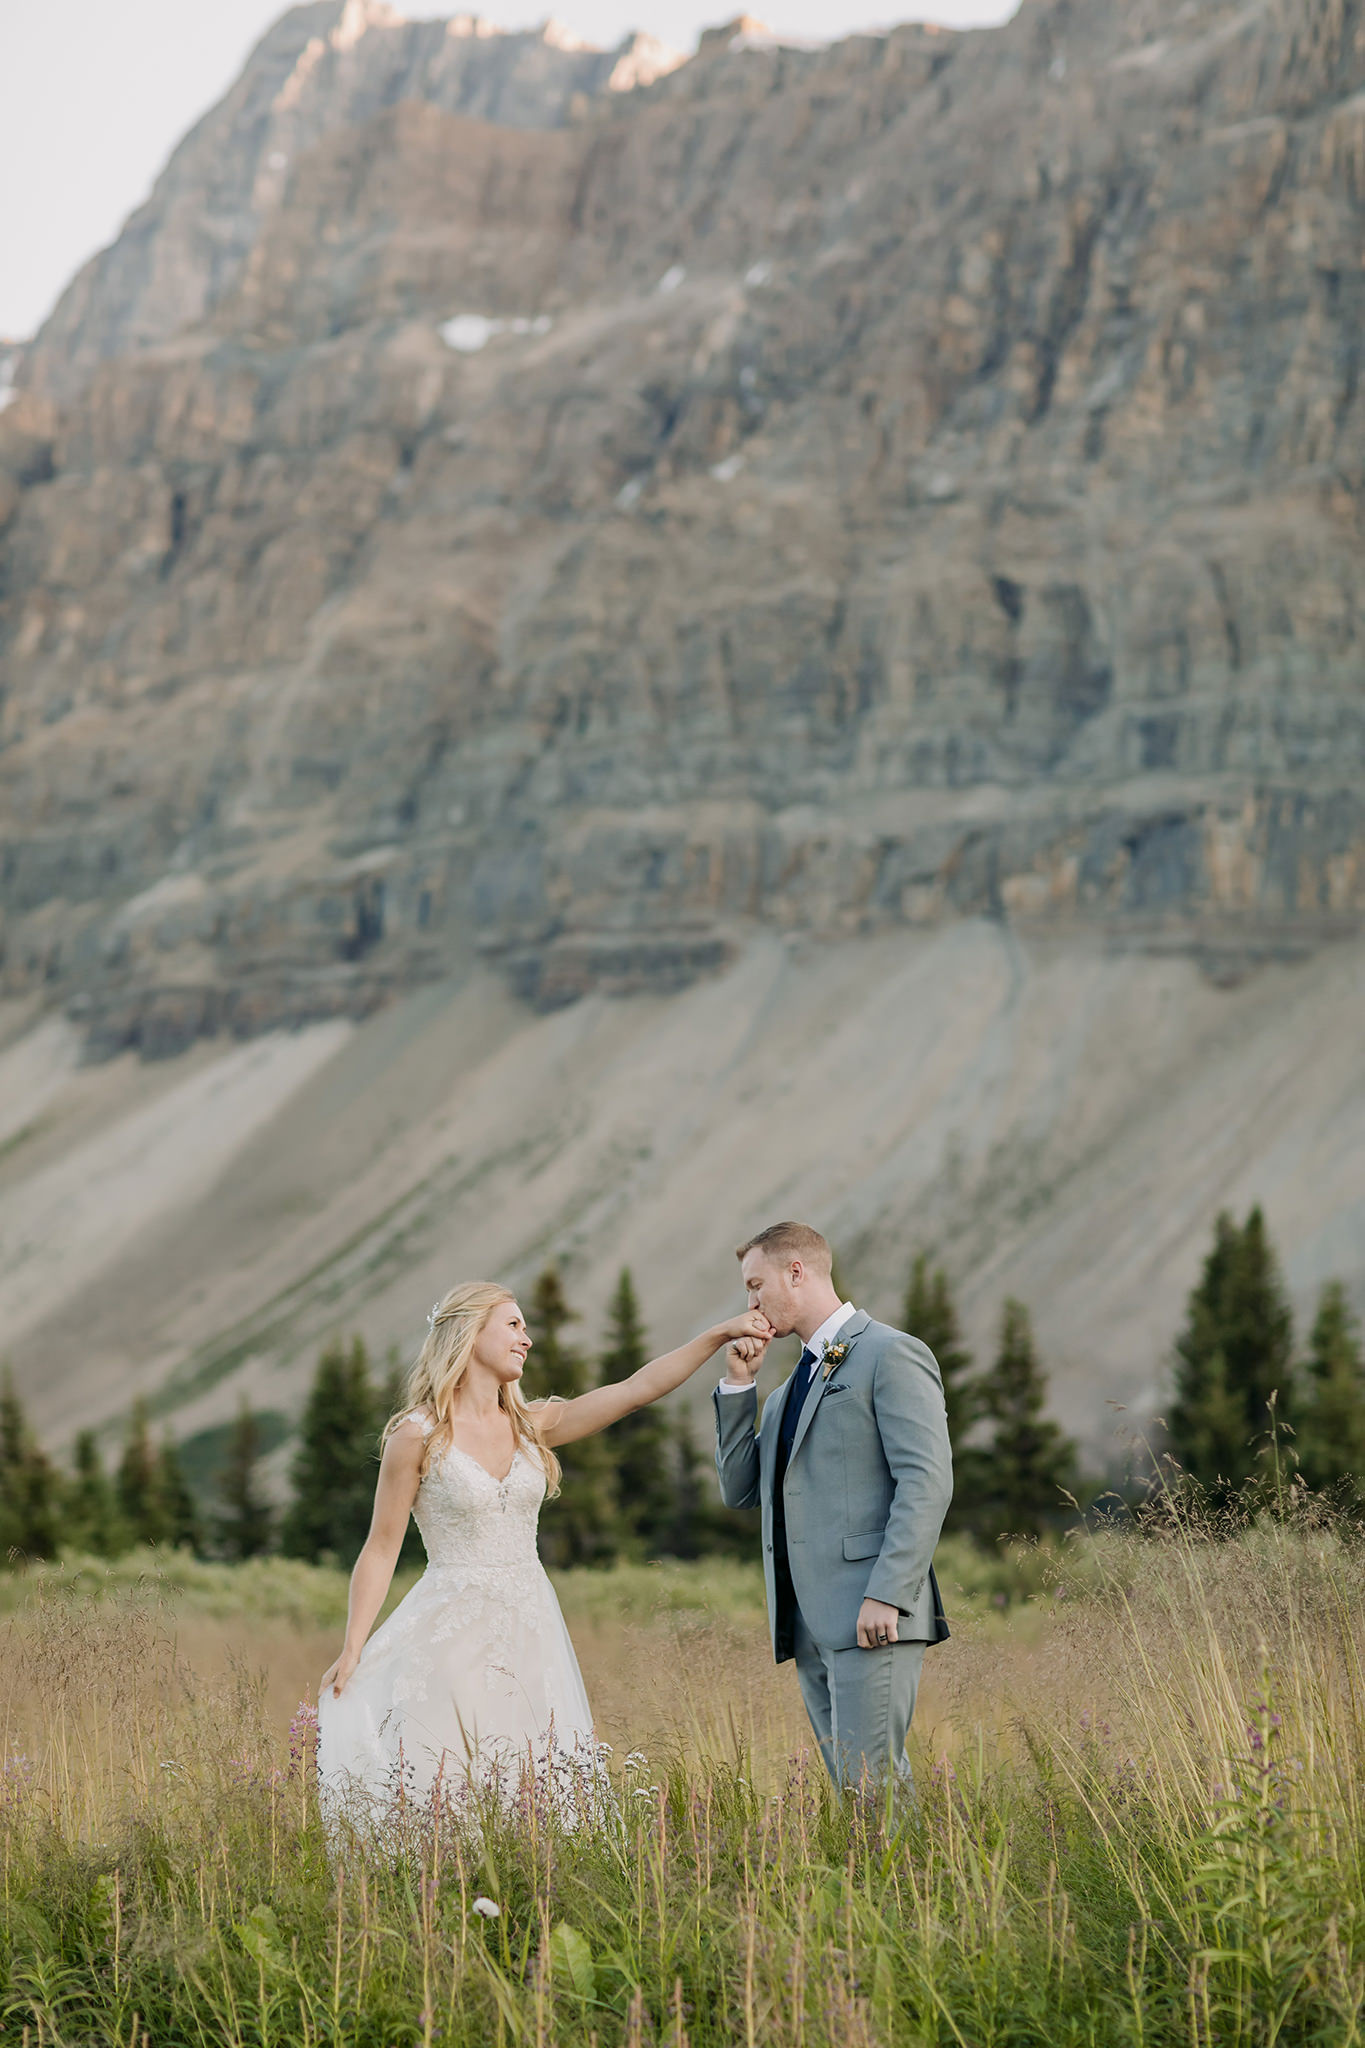 Exploring Icefields Parkway in Banff National Park on their wedding day. Summer mountain elopement at Bow Lake photographed by local wedding & elopement photographer ENV Photography 